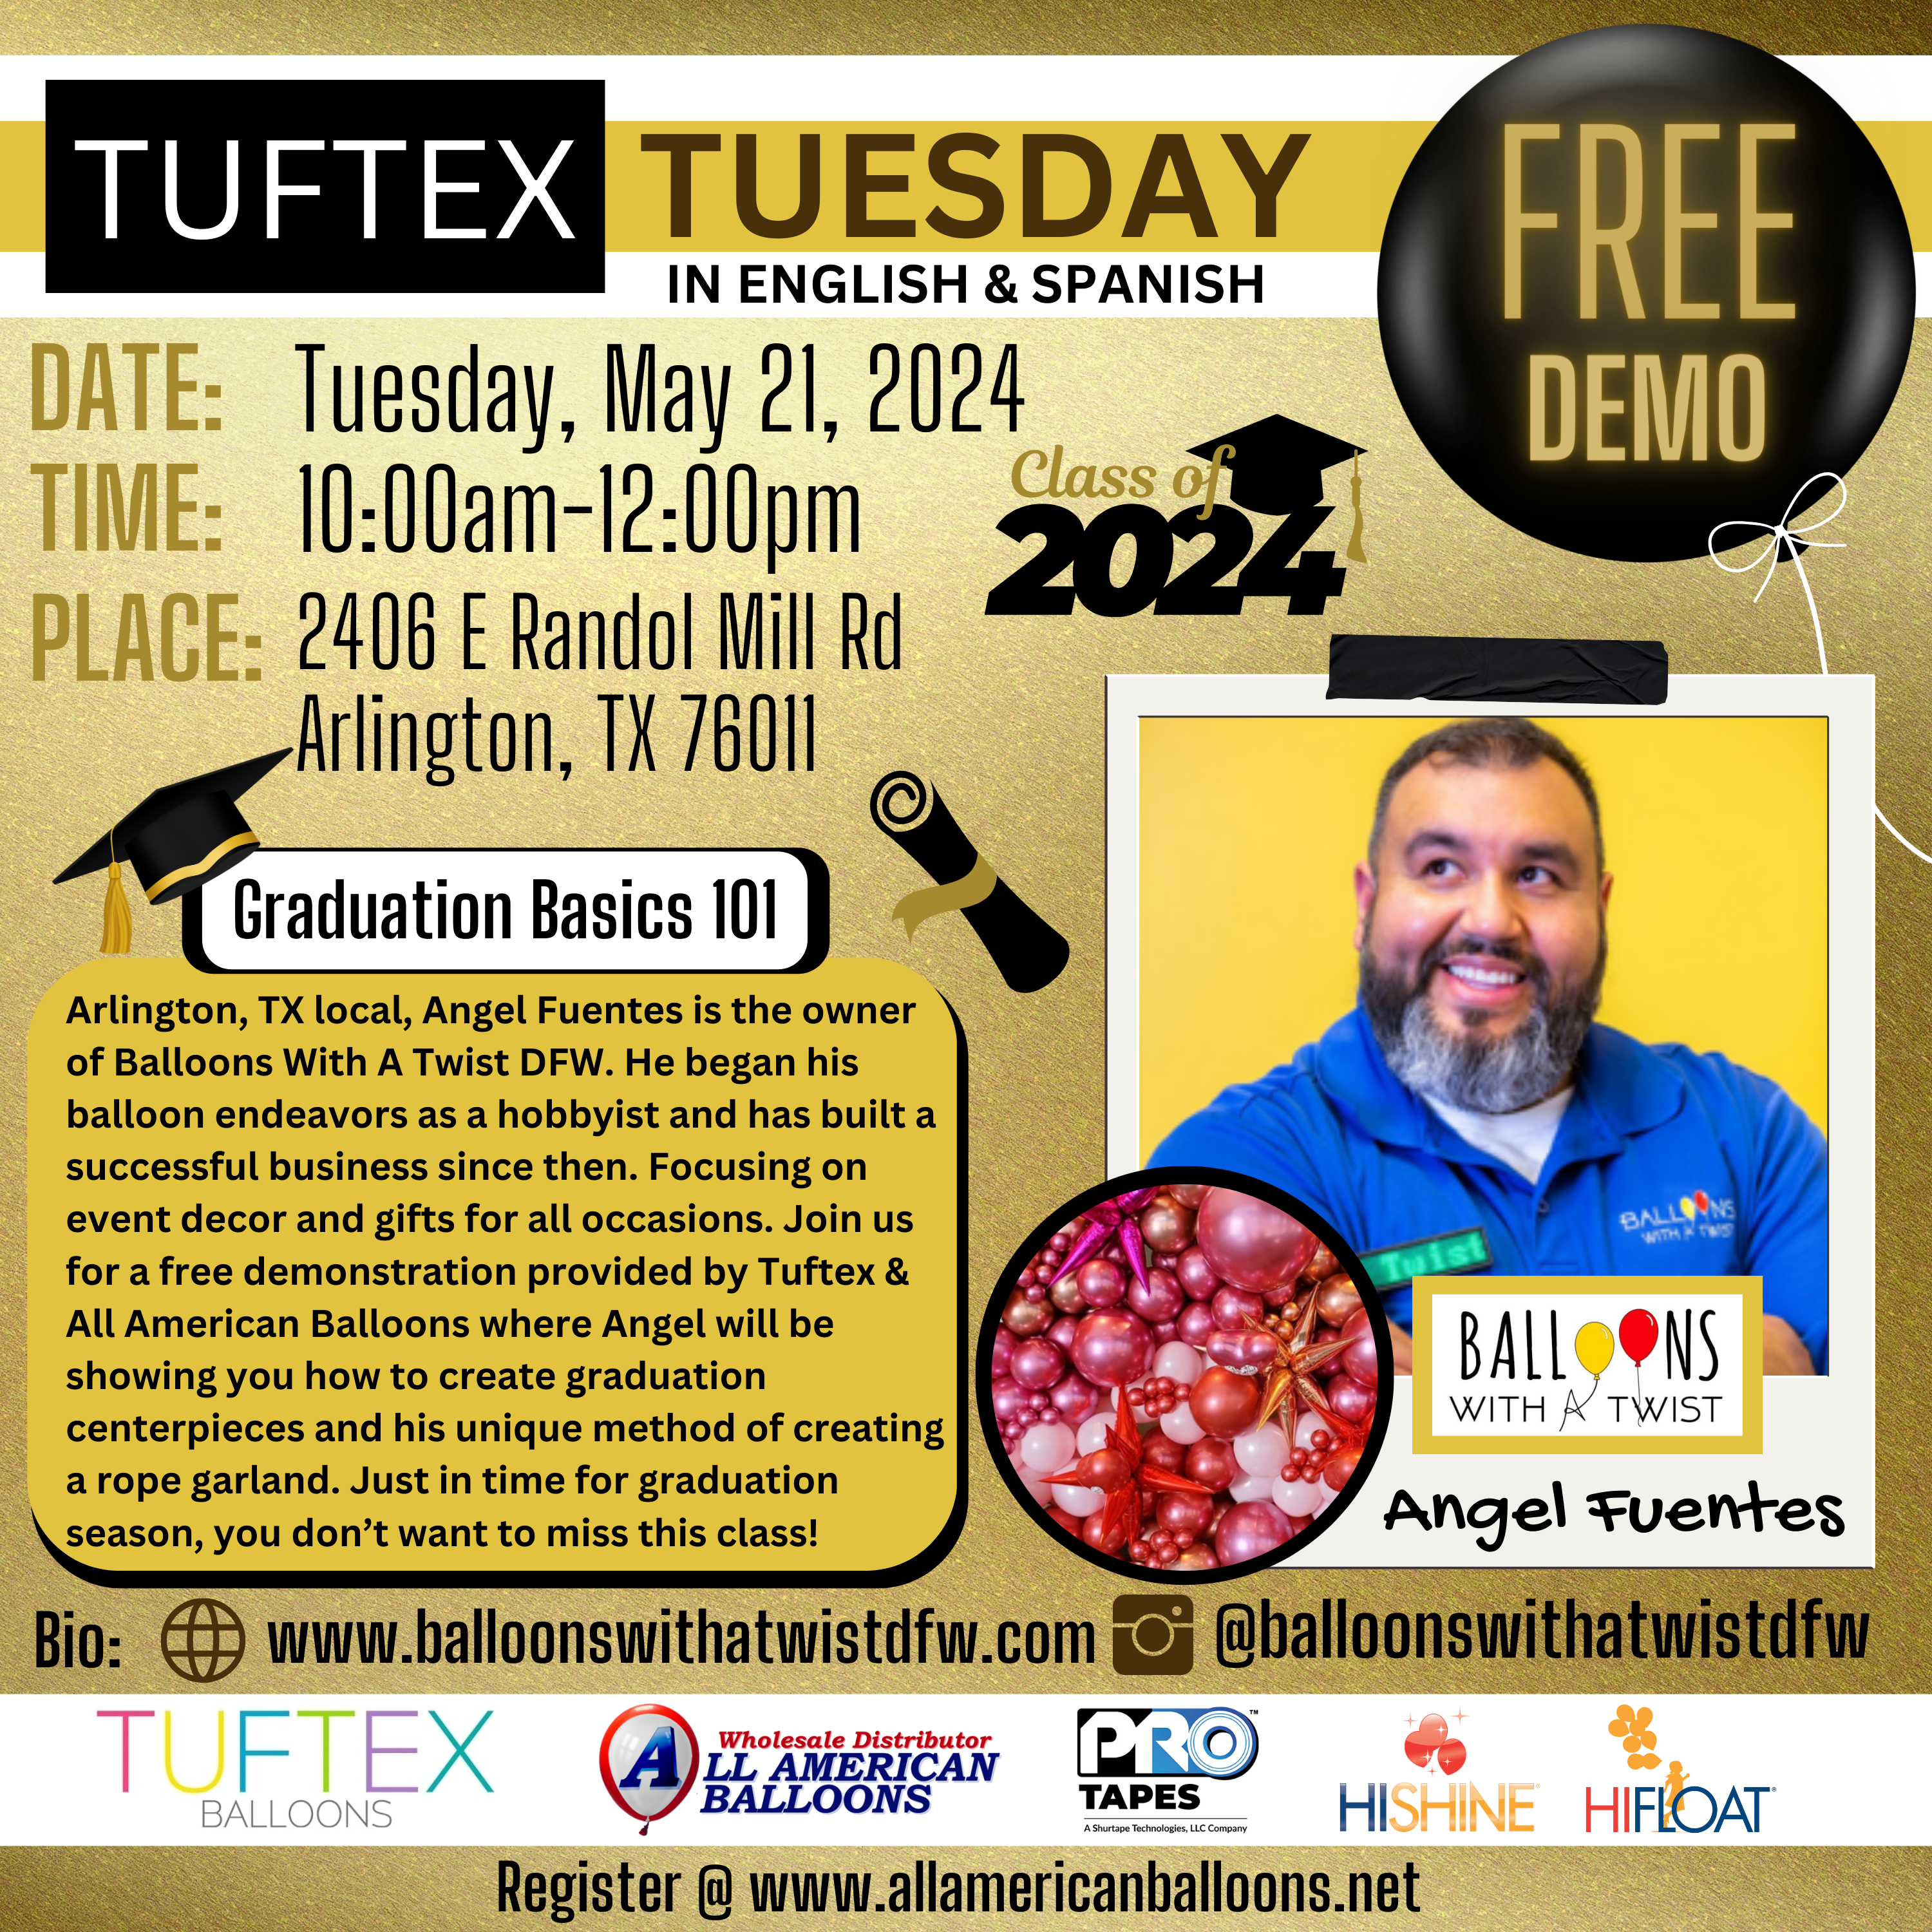 TUFTEX TUESDAY - Featuring Balloons With A Twist DFW | 5/21/24 10am-12pm - FREE Demo! In English & Spanish!